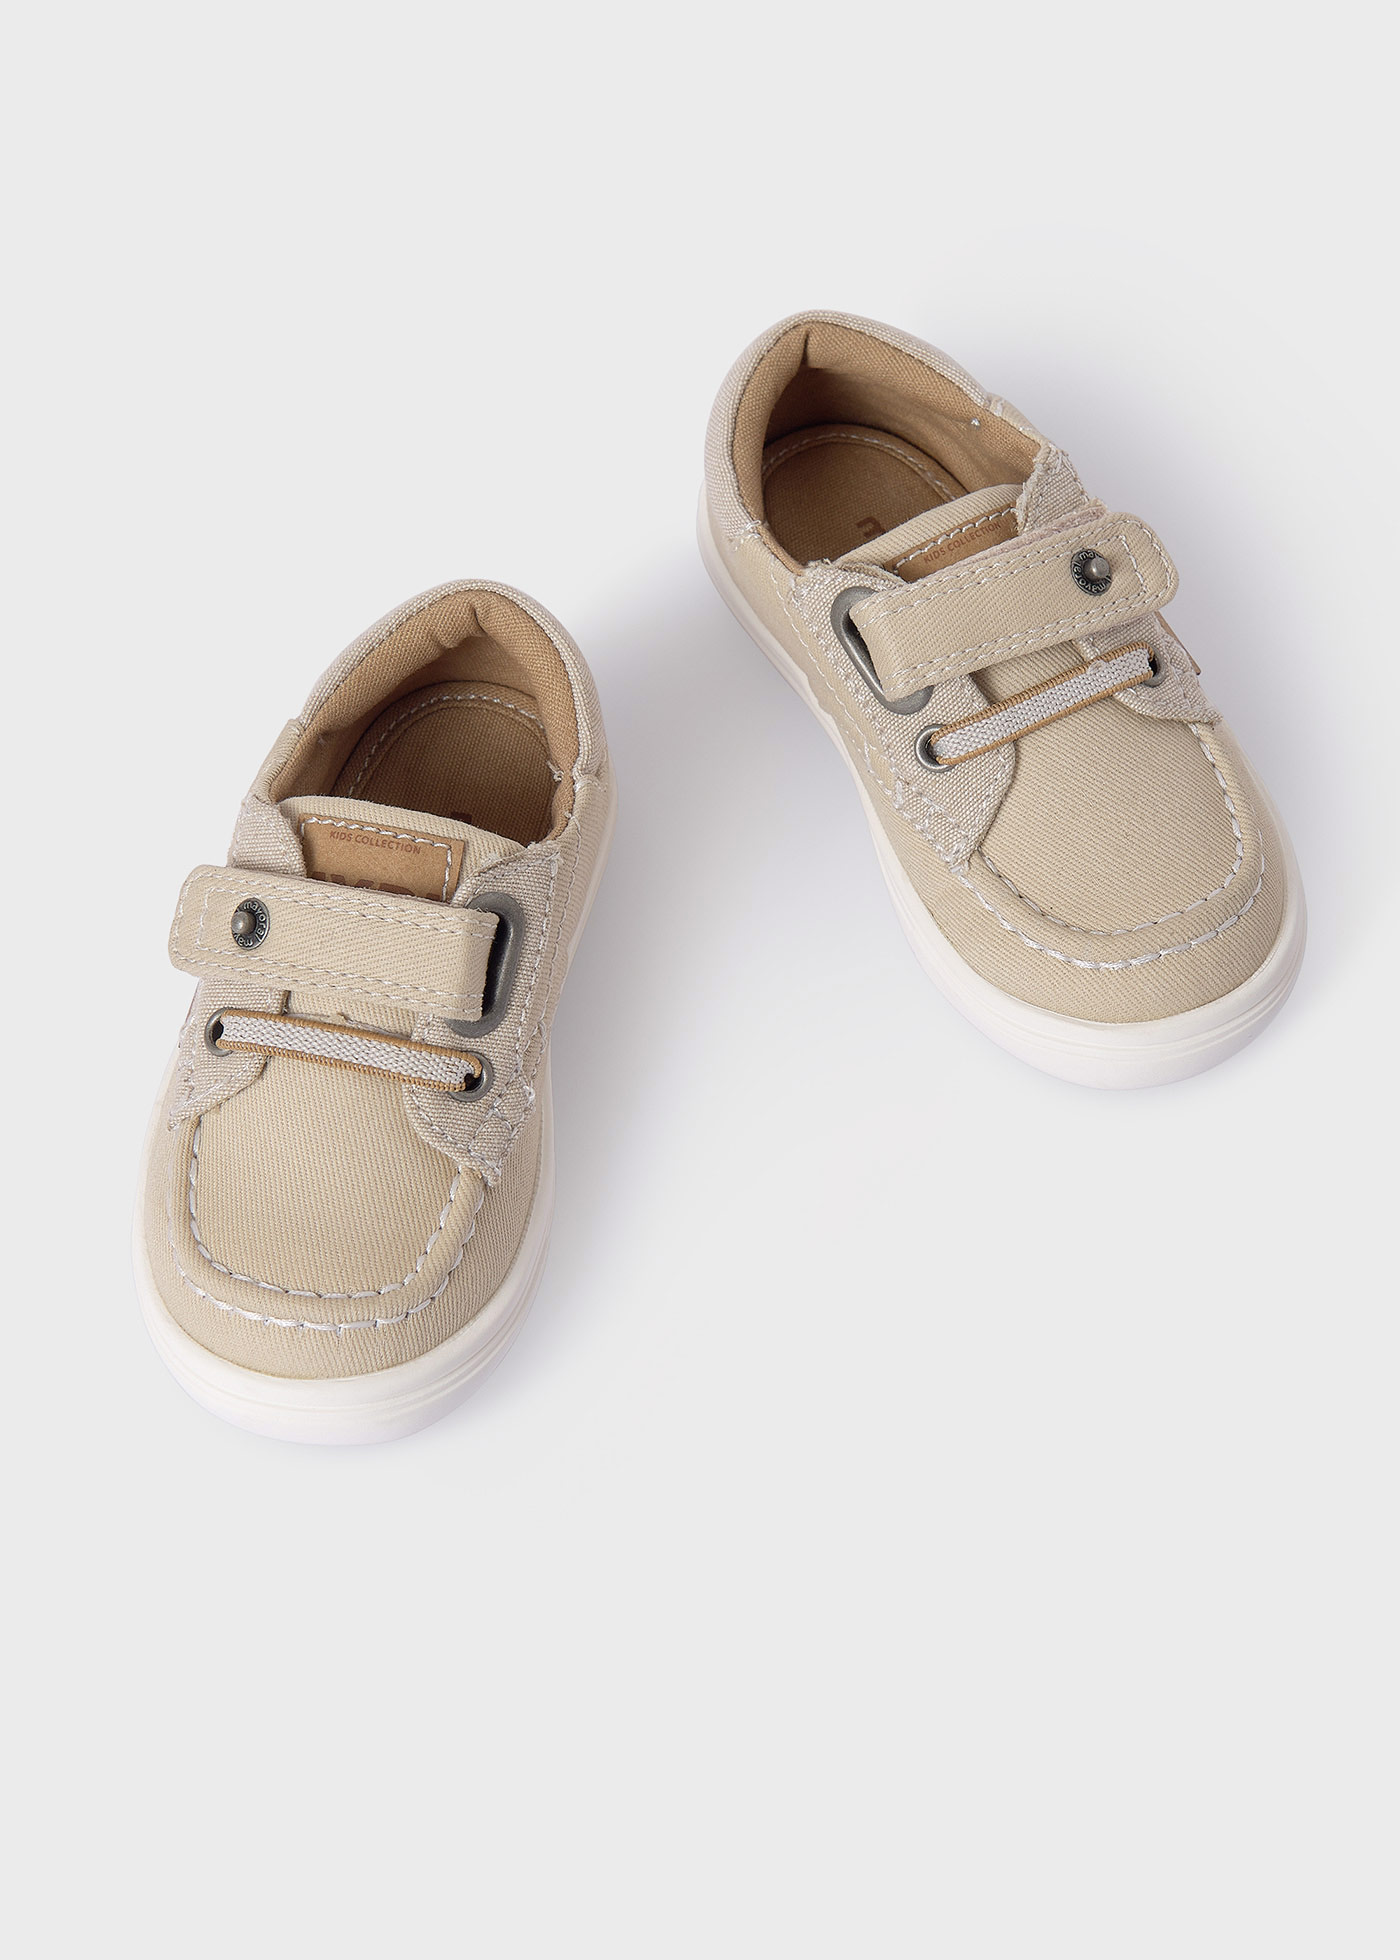 Baby fabric boat shoes